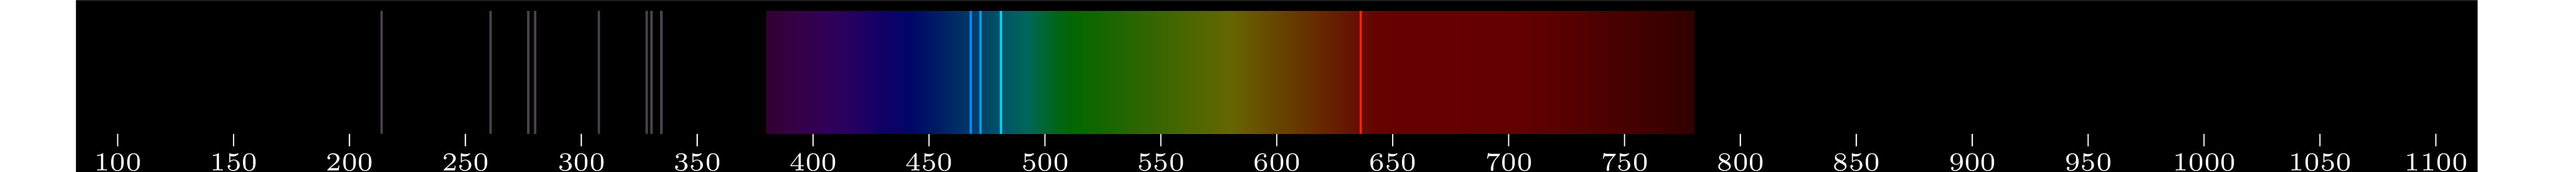 emmision spectra of element Zn